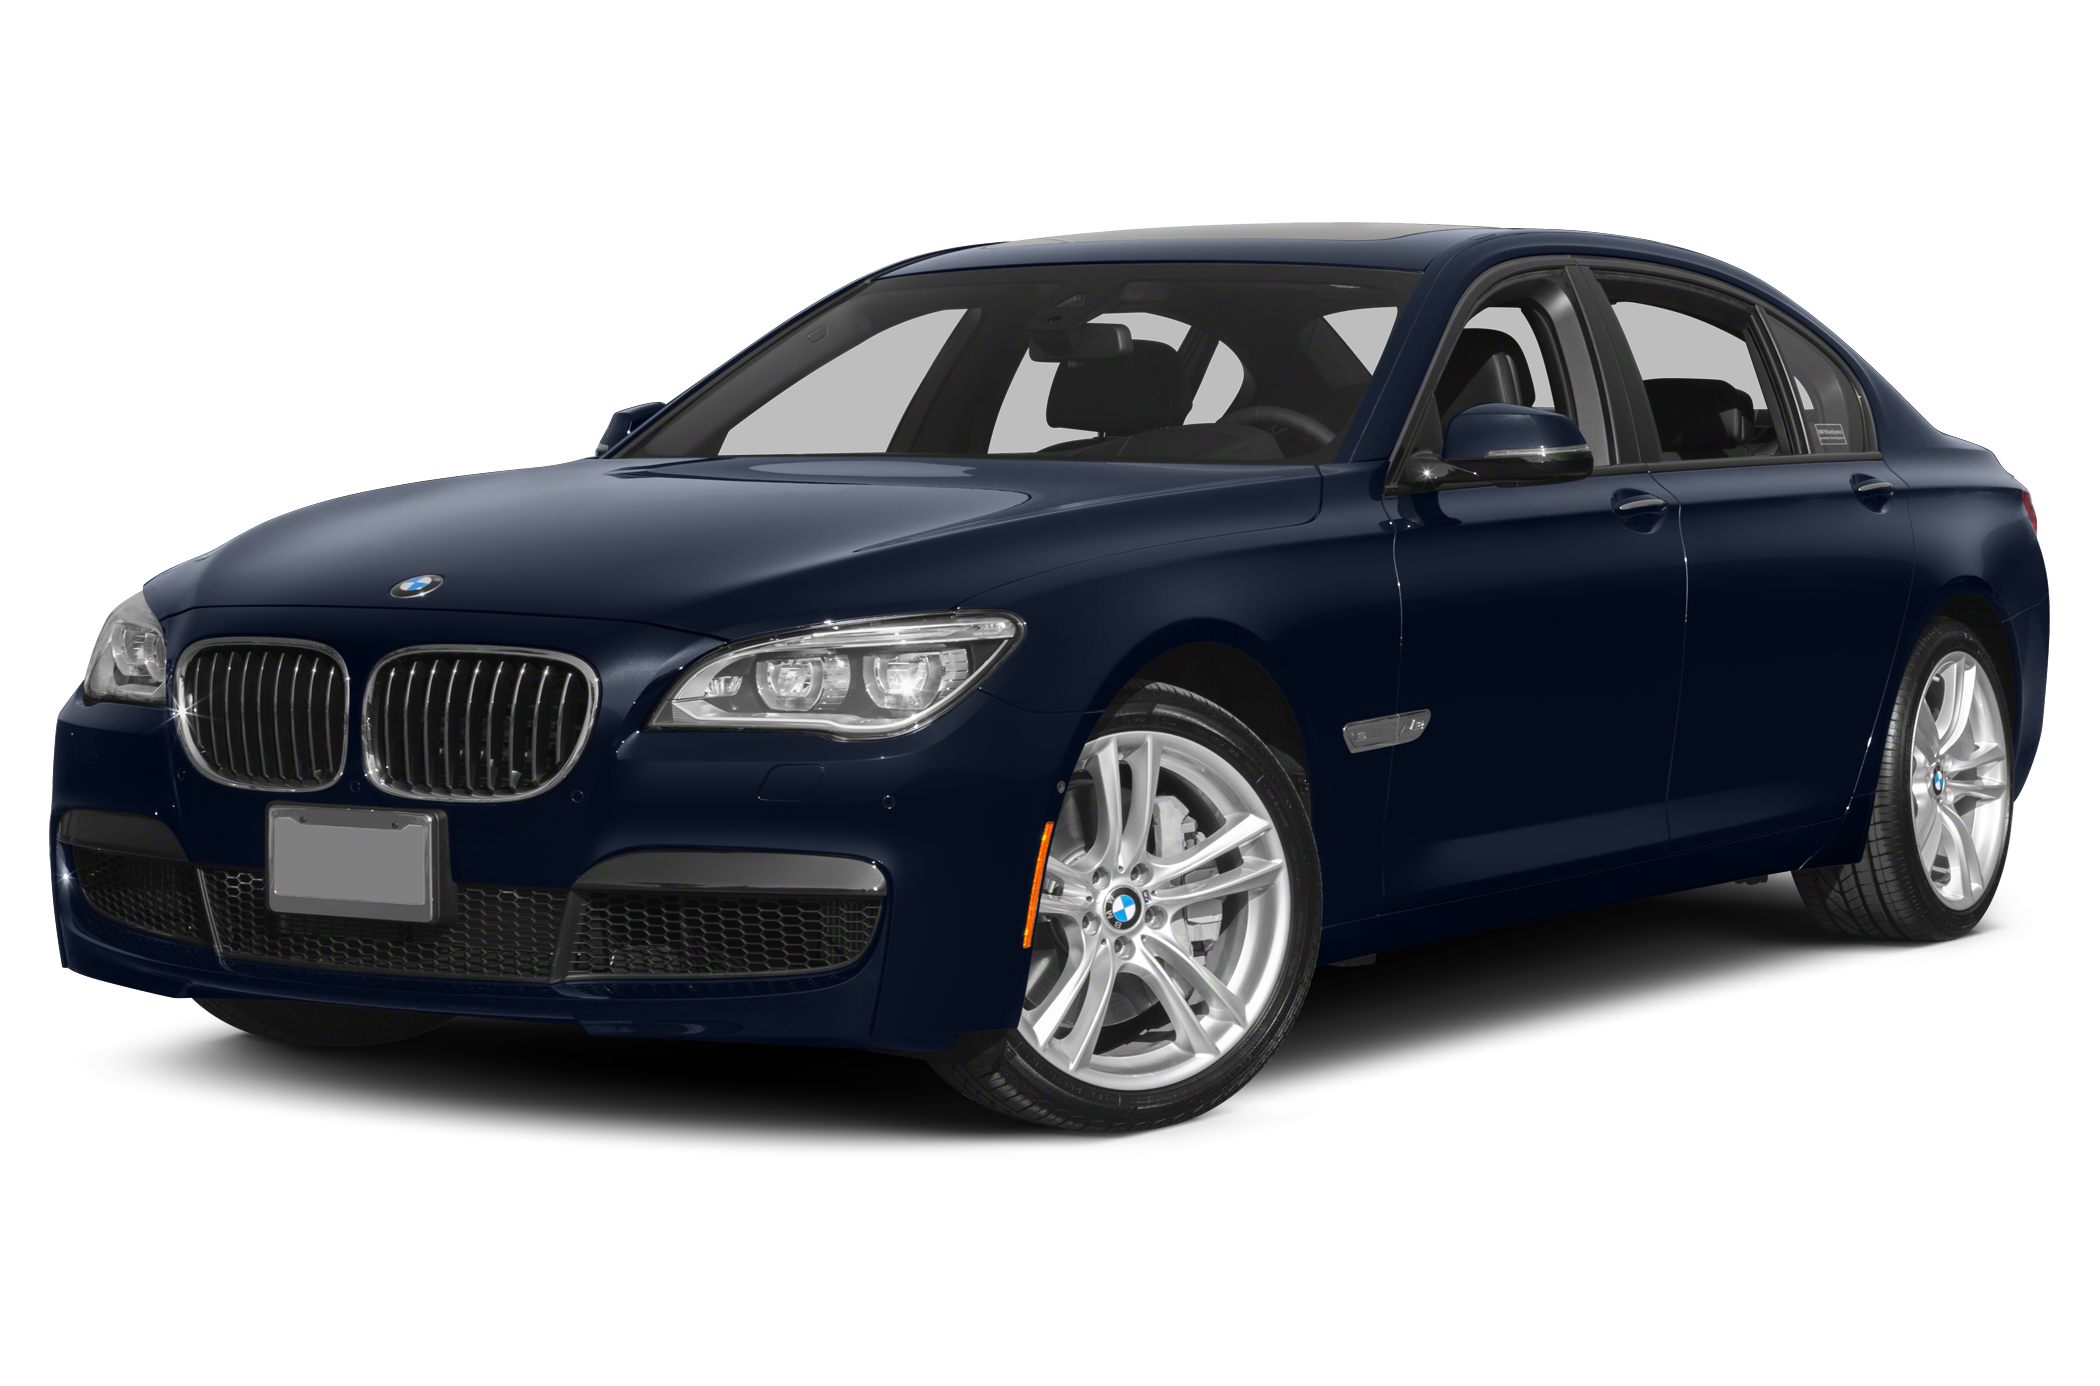 Bmw of columbus used cars #5